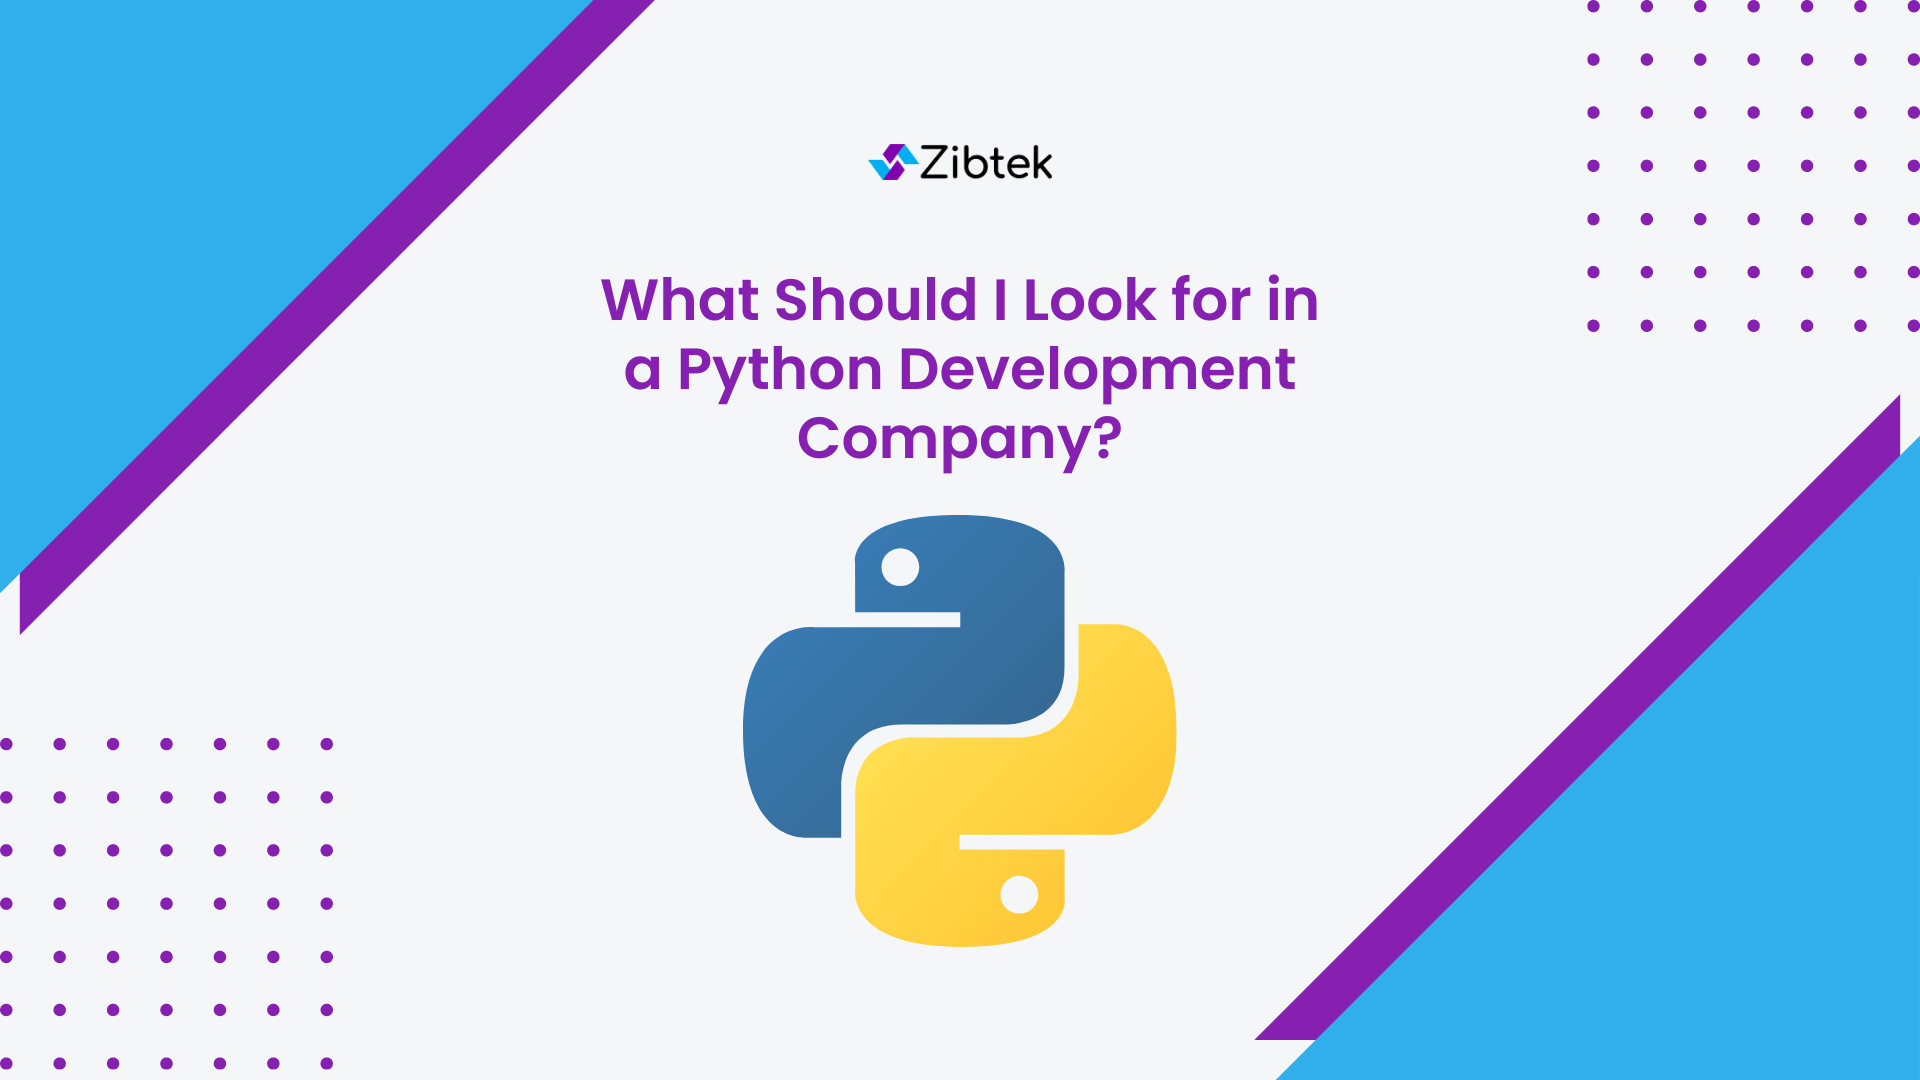 What Should I Look for in a Python Development Company?